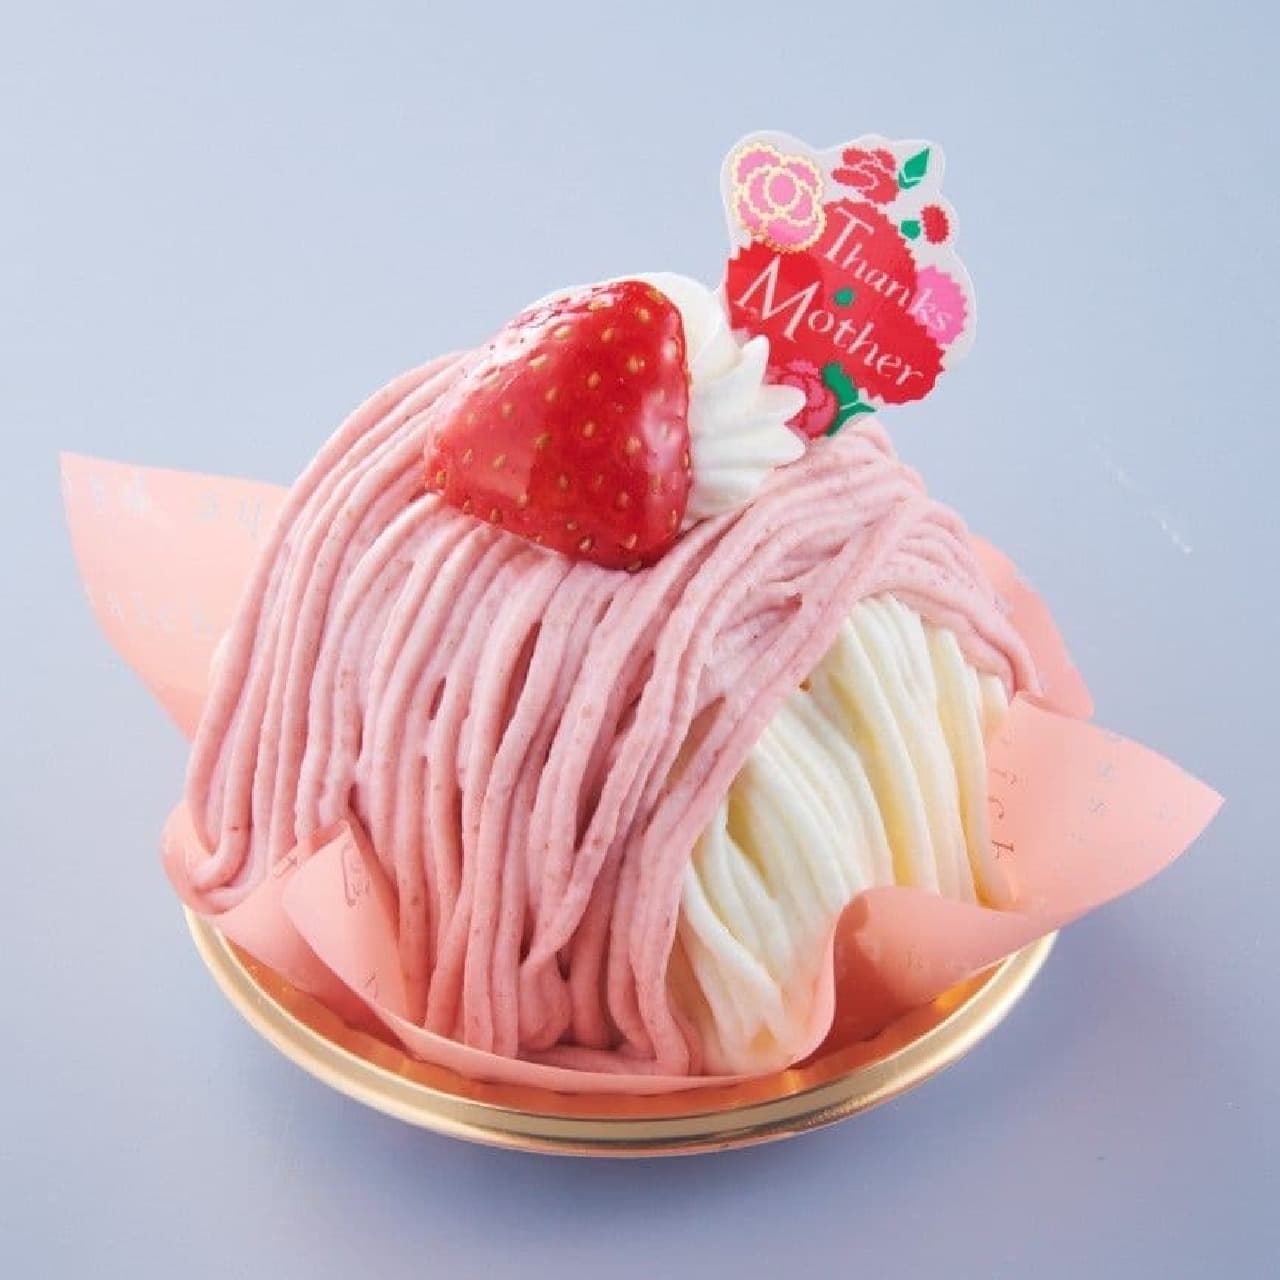 Chateraise "Mother's Day Strawberry Mont Blanc